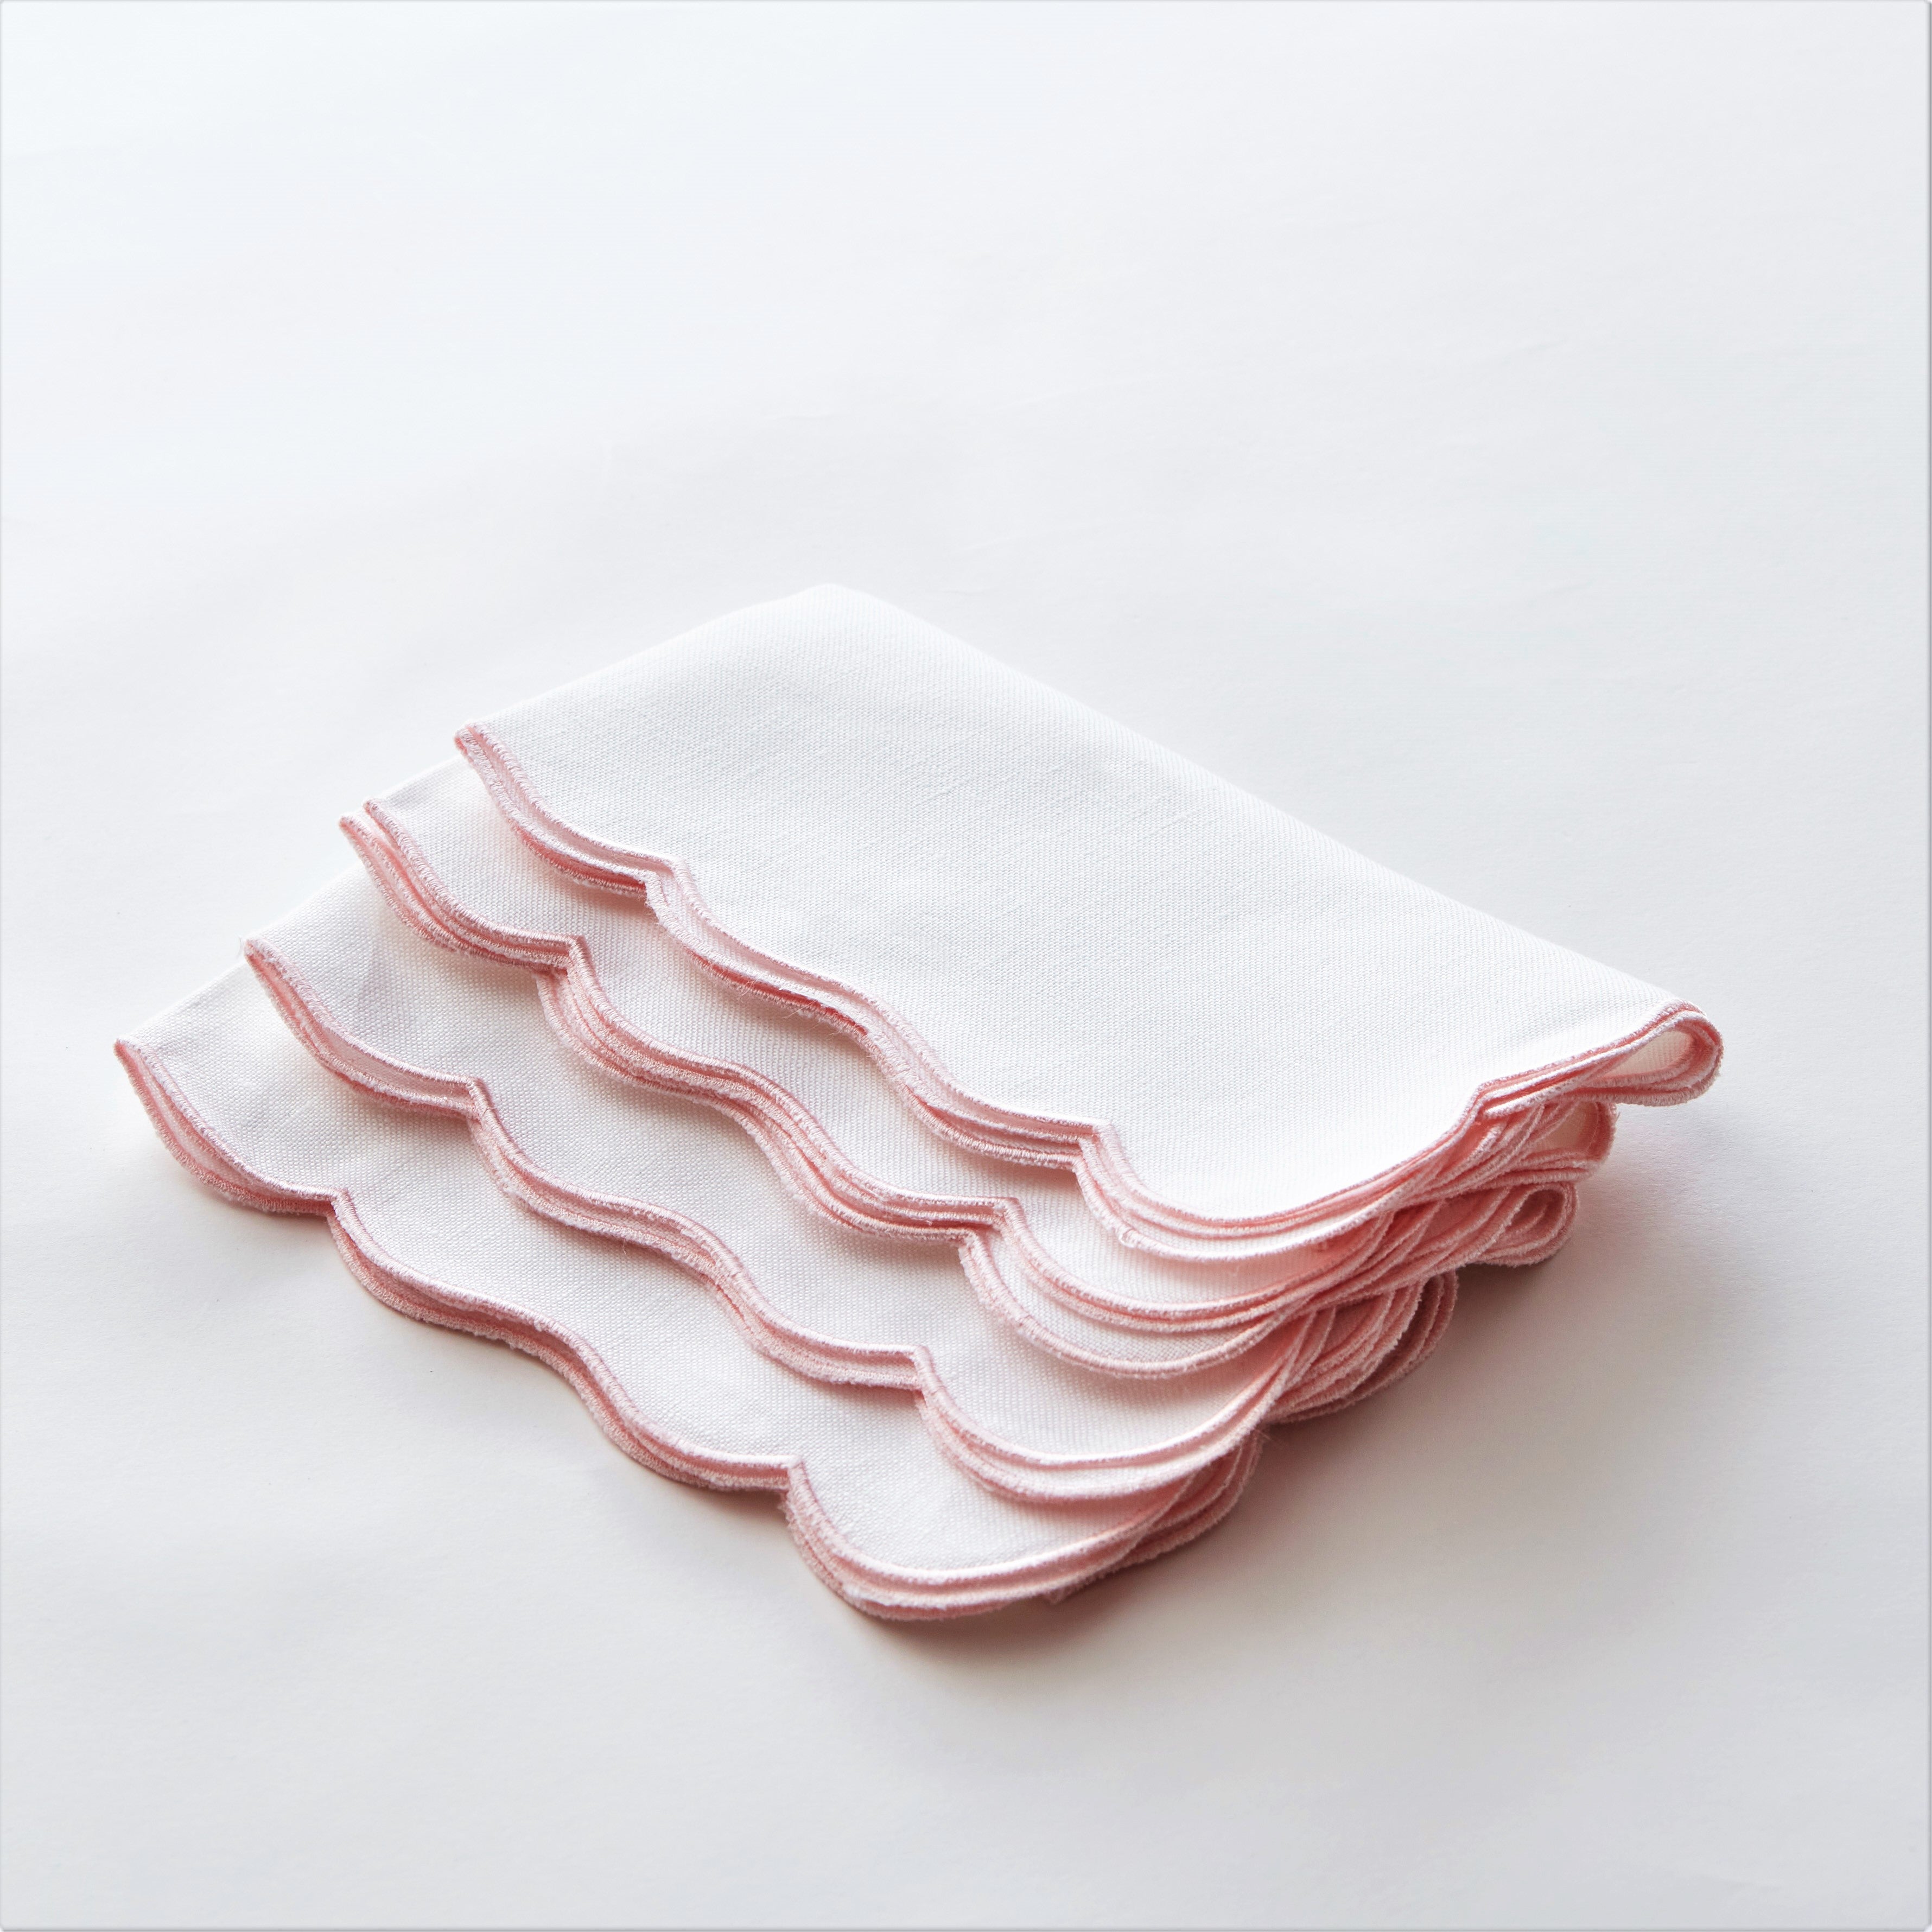 Embroidered Pale Pink Scallop Napkin (set of 4)